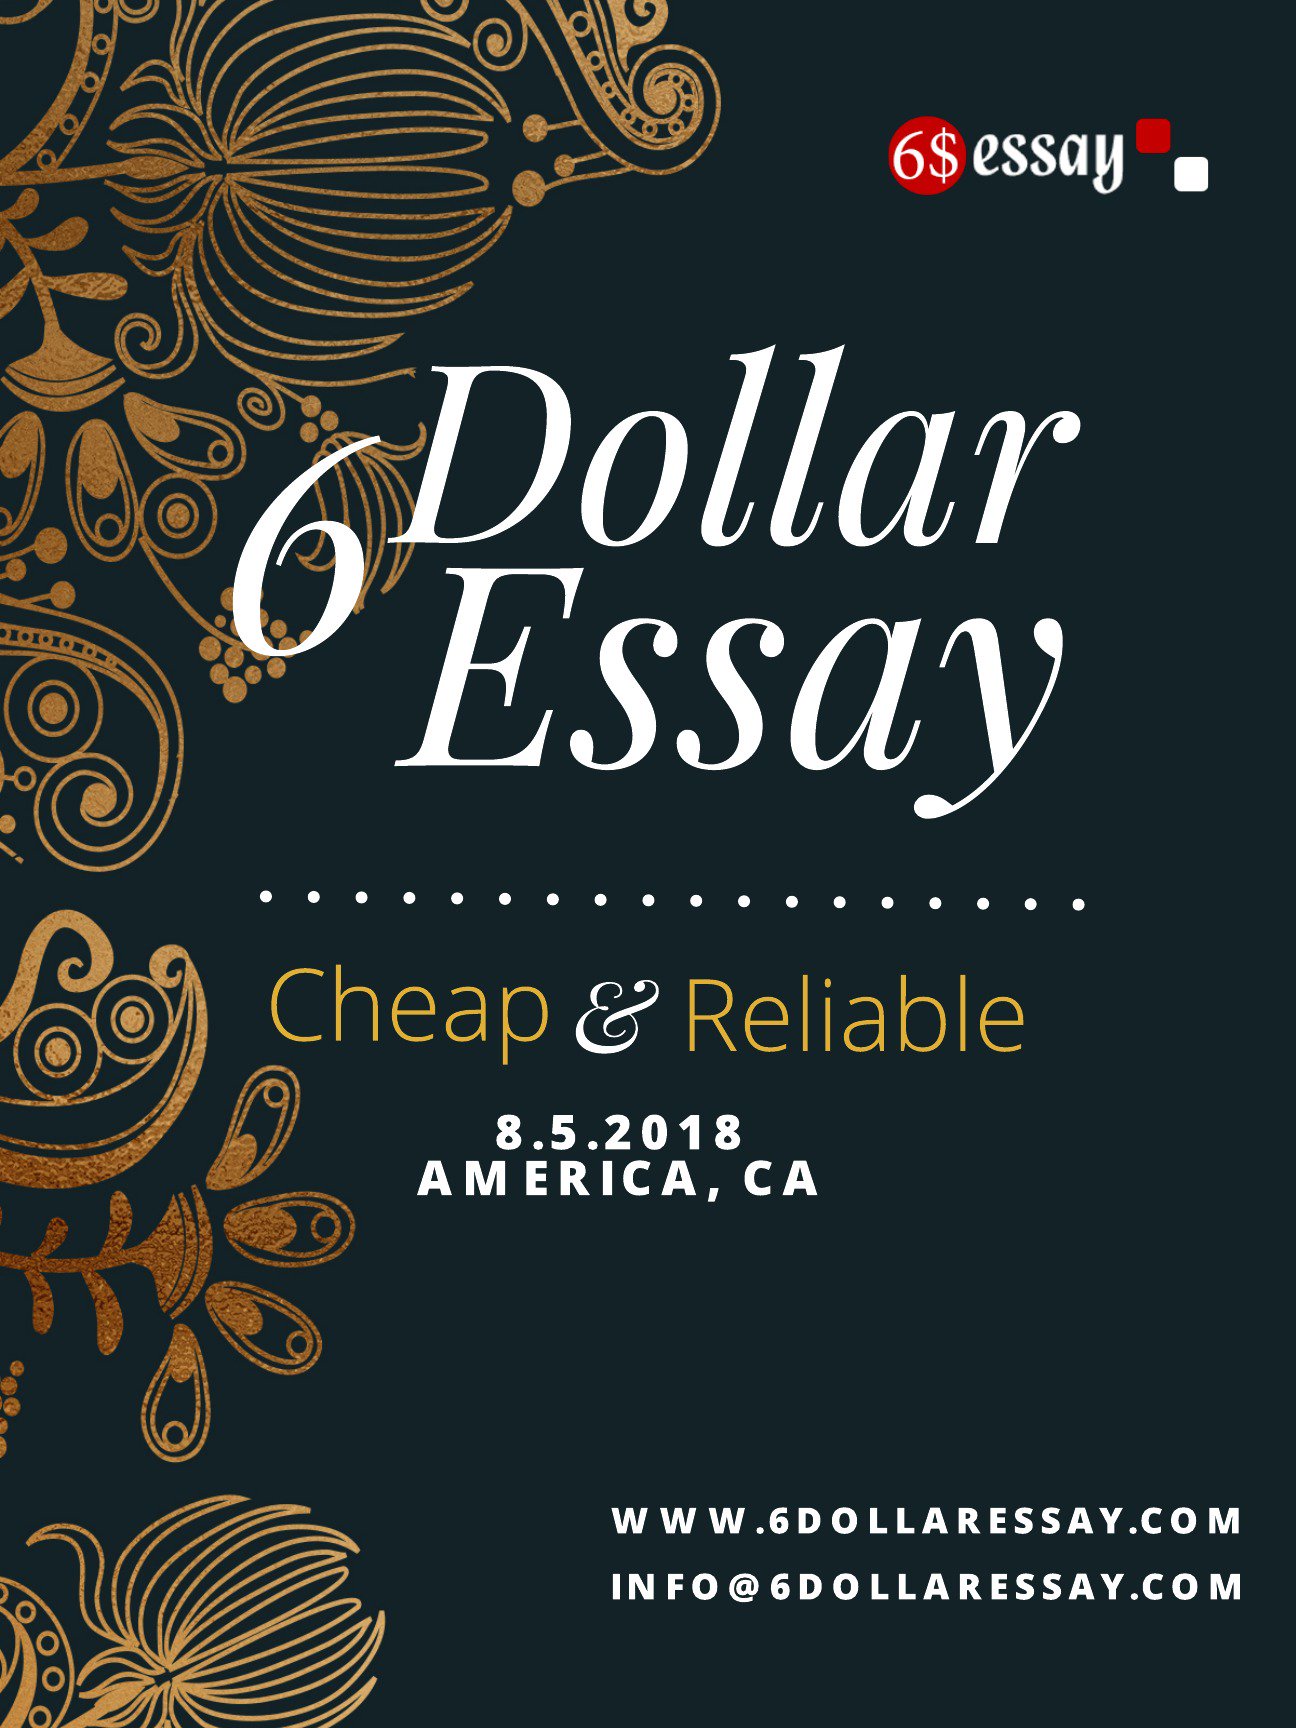 Cheapest essay writing services 2018